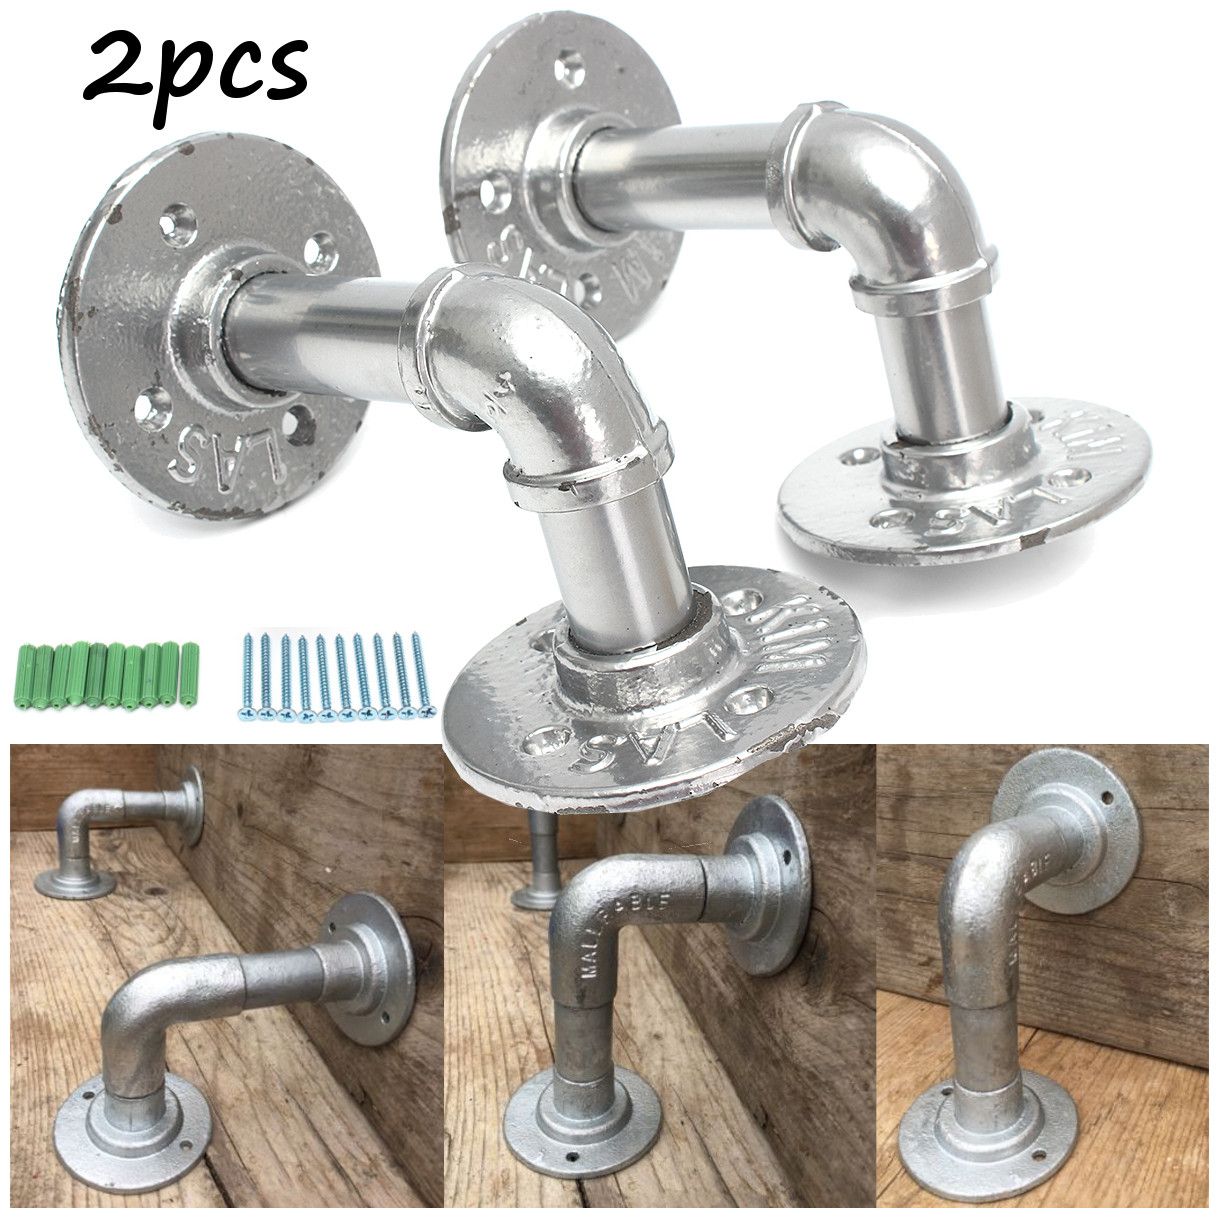 2Pcs-Steampunk-Industrial-Steel-Pipe-Shelf-Brackets-Iron-Pipe-Bracket-With-Screws-Pipes-Fittings-1274686